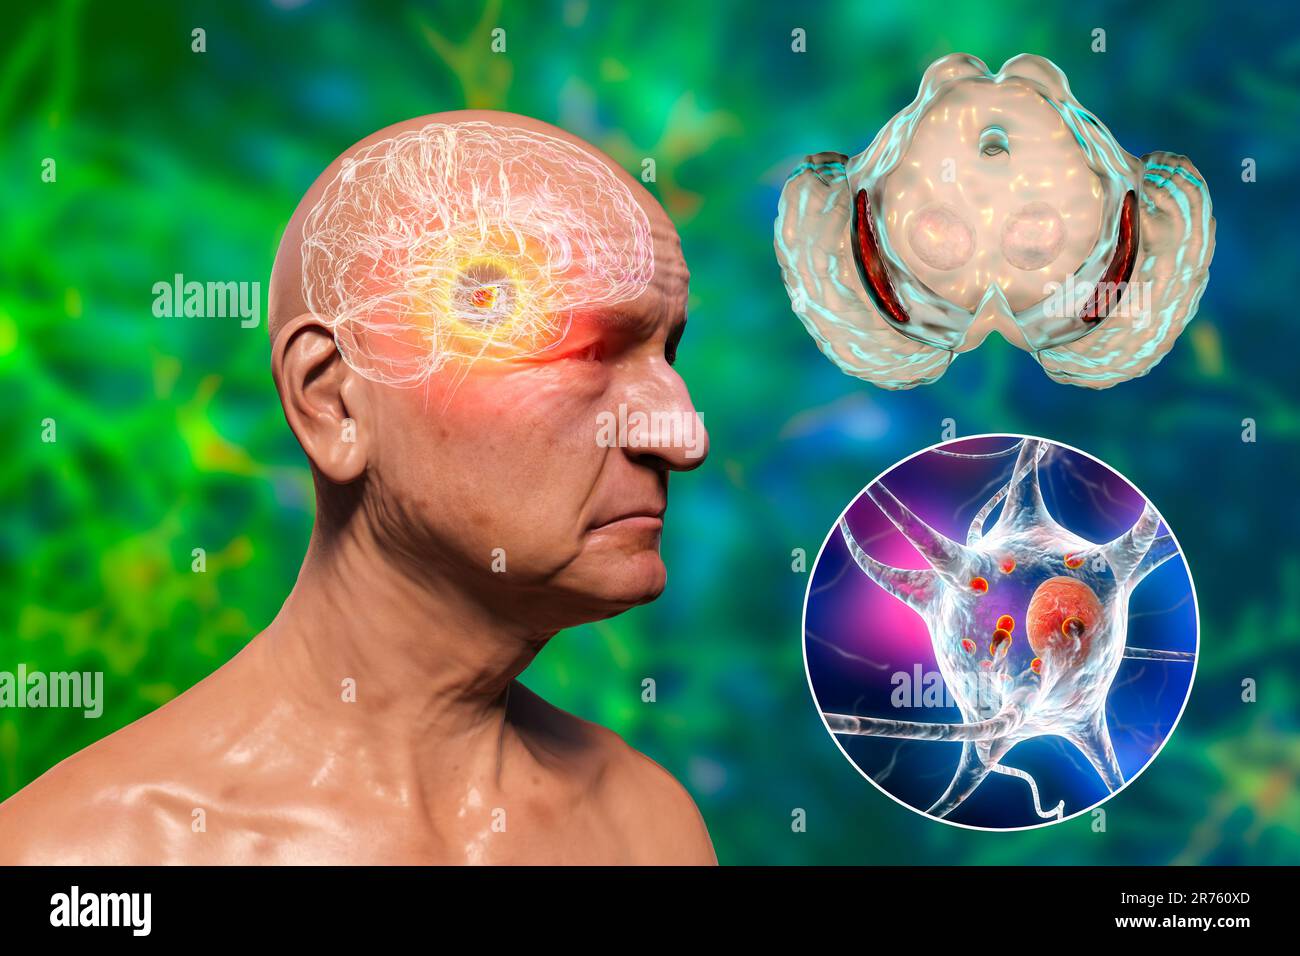 Substantia nigra. Computer illustration showing a degenerated substantia nigra in Parkinson's disease. The substantia nigra plays an important role in Stock Photo